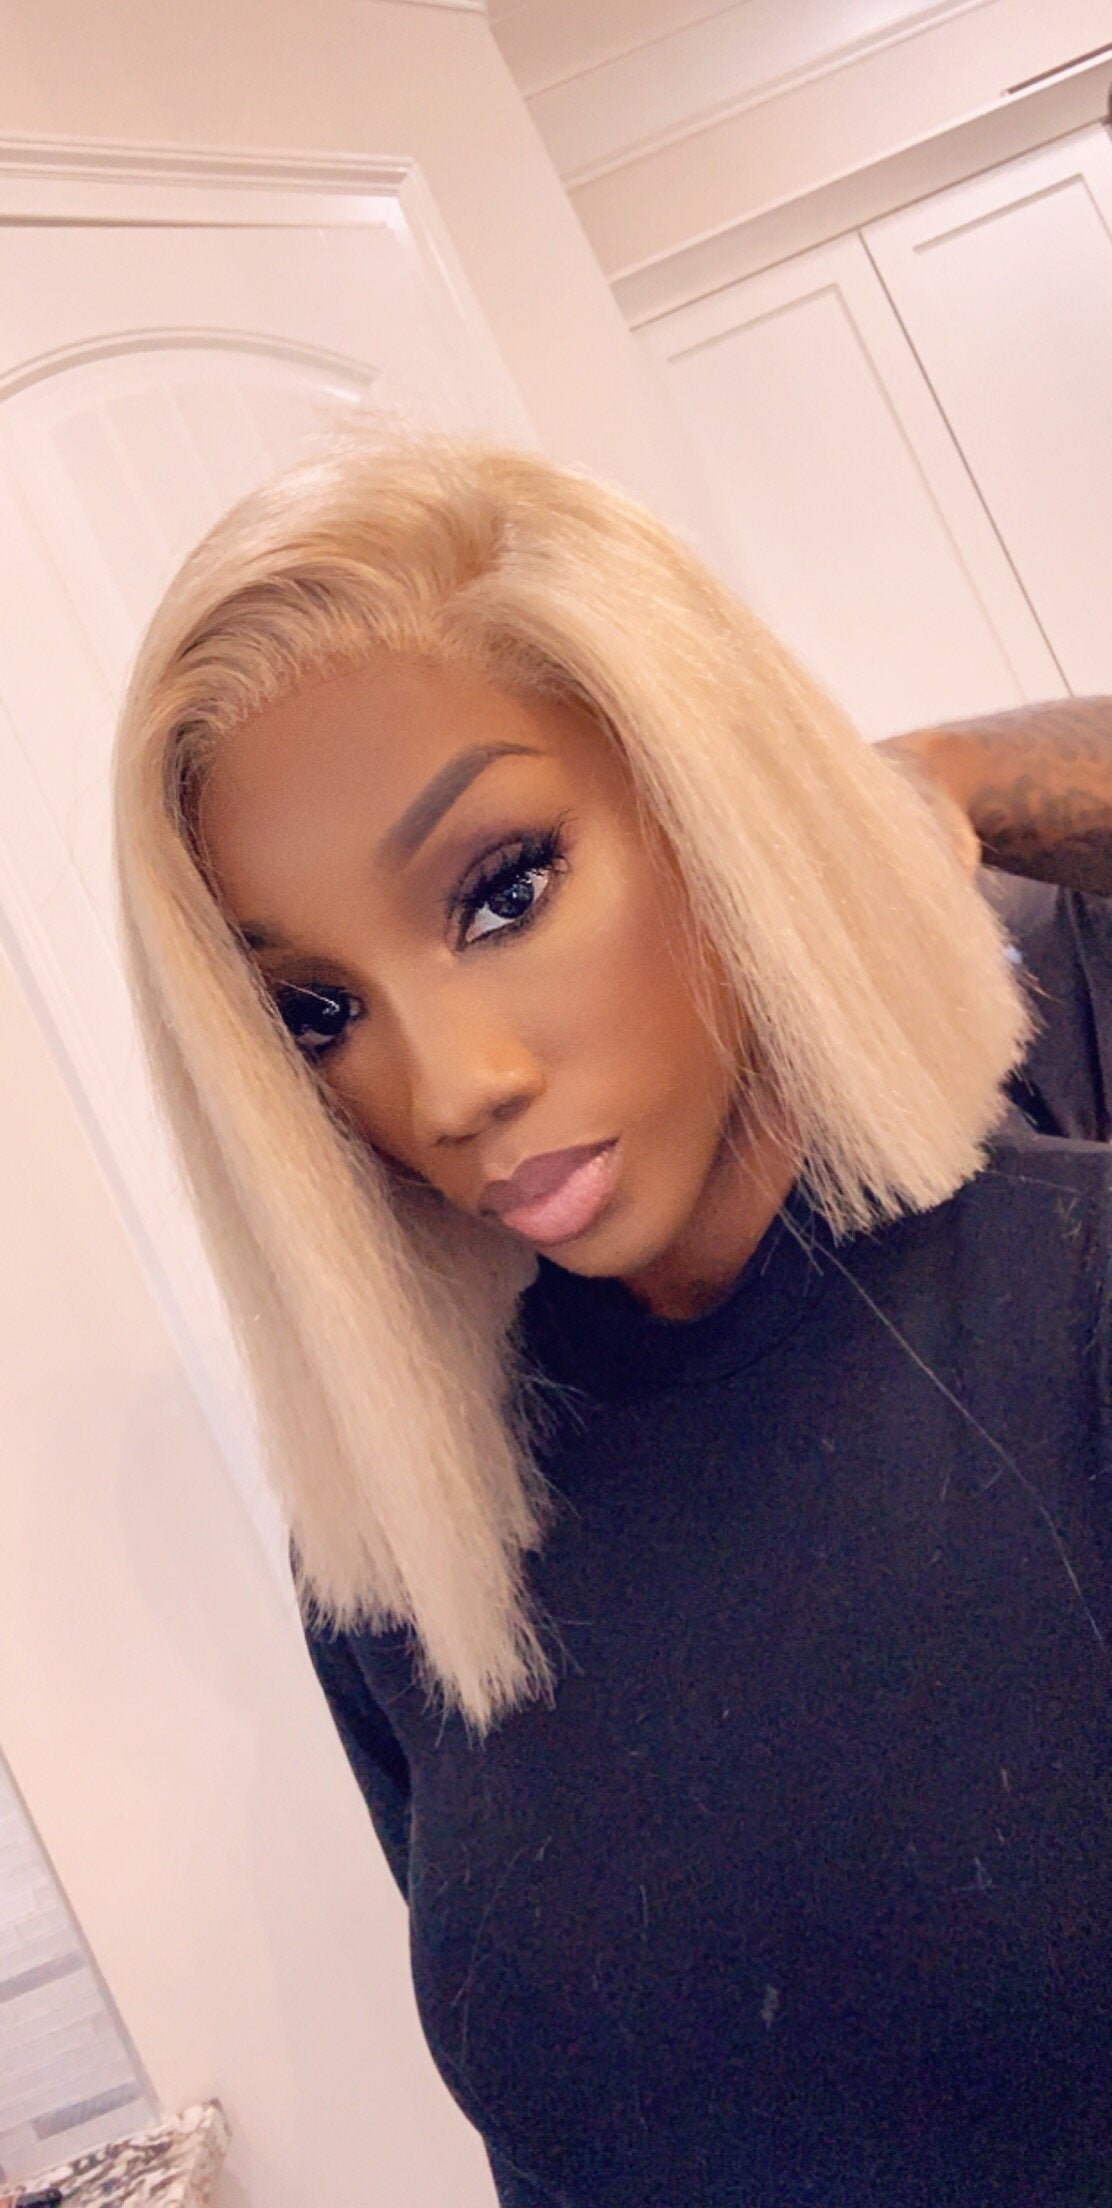 Lace Frontal Wig